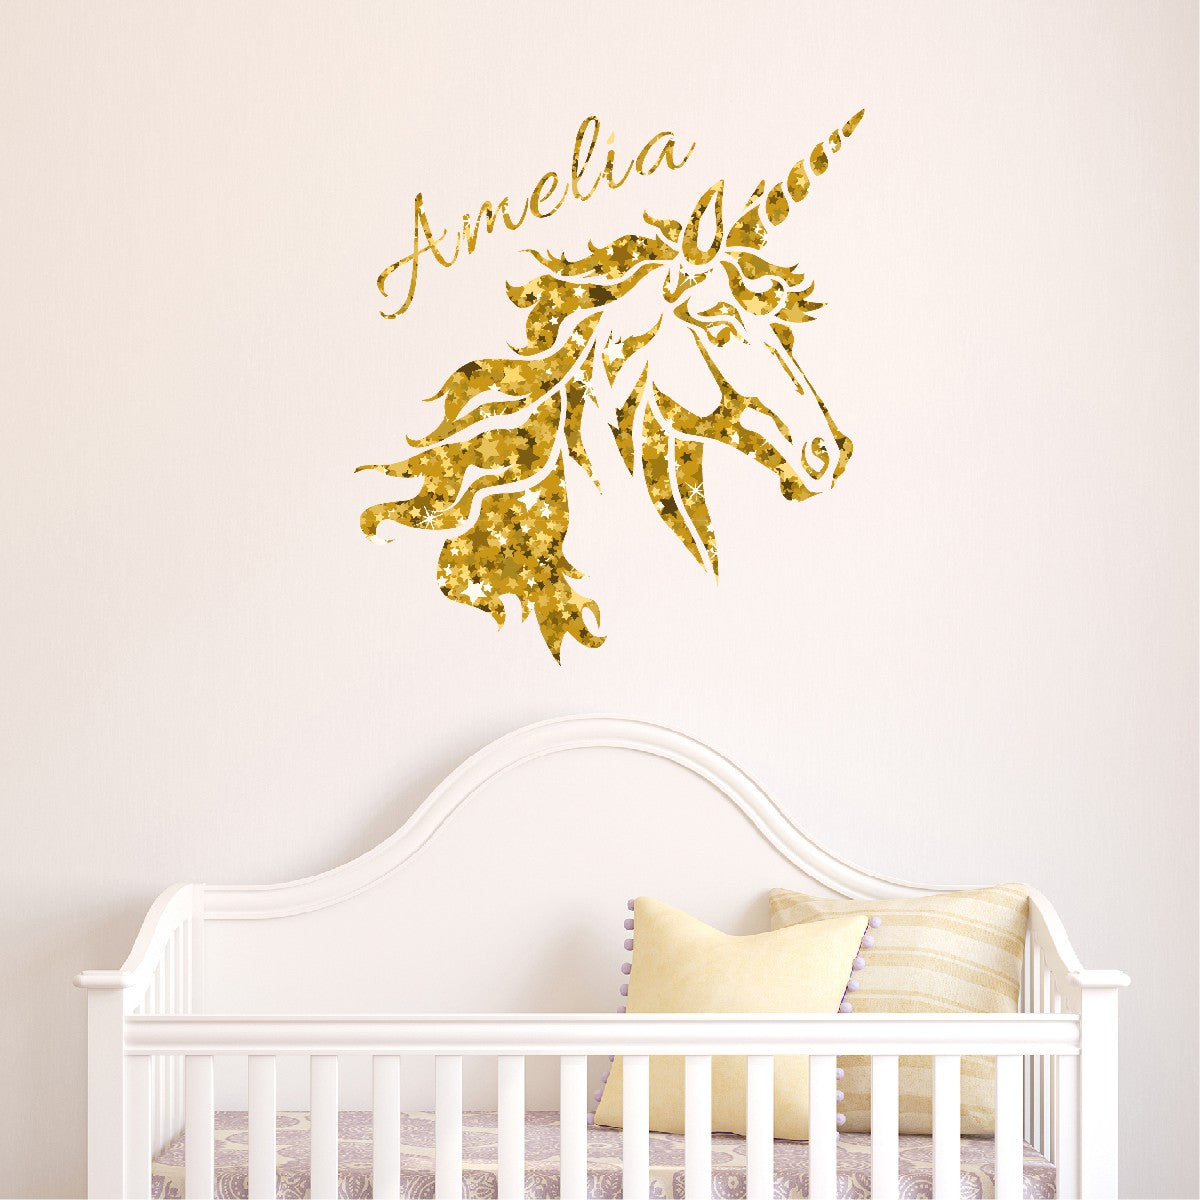 Unicorn Name Wall Decal - Transform Spaces with Personalized Magical Unicorn Stickers with Name  - Adorable Unicorn Wall Sticker for Kid's Room